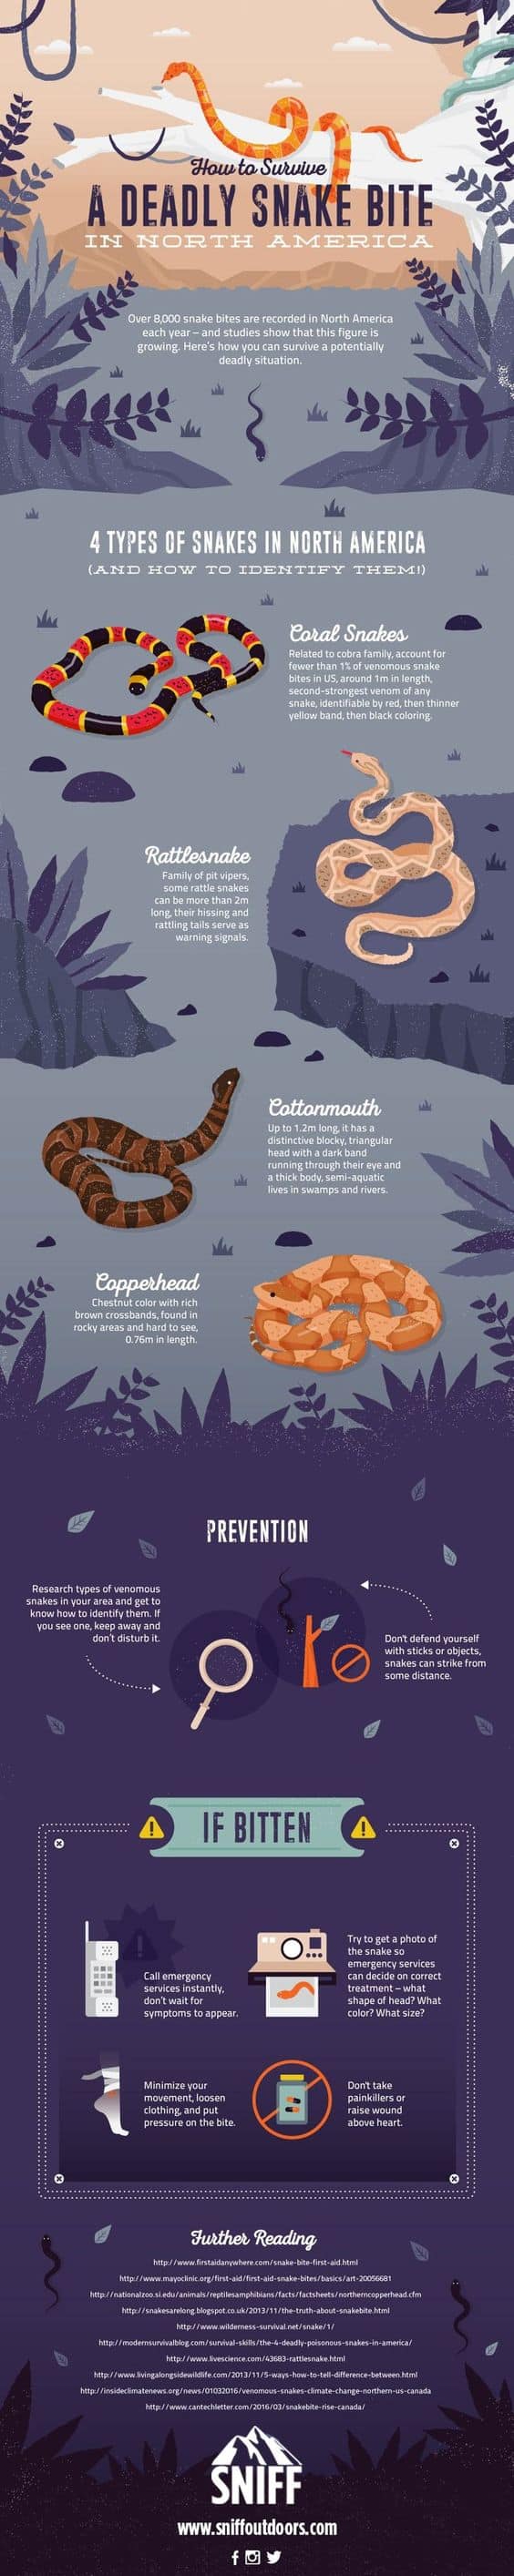 How To Survive A Deadly Snake Bite infographic